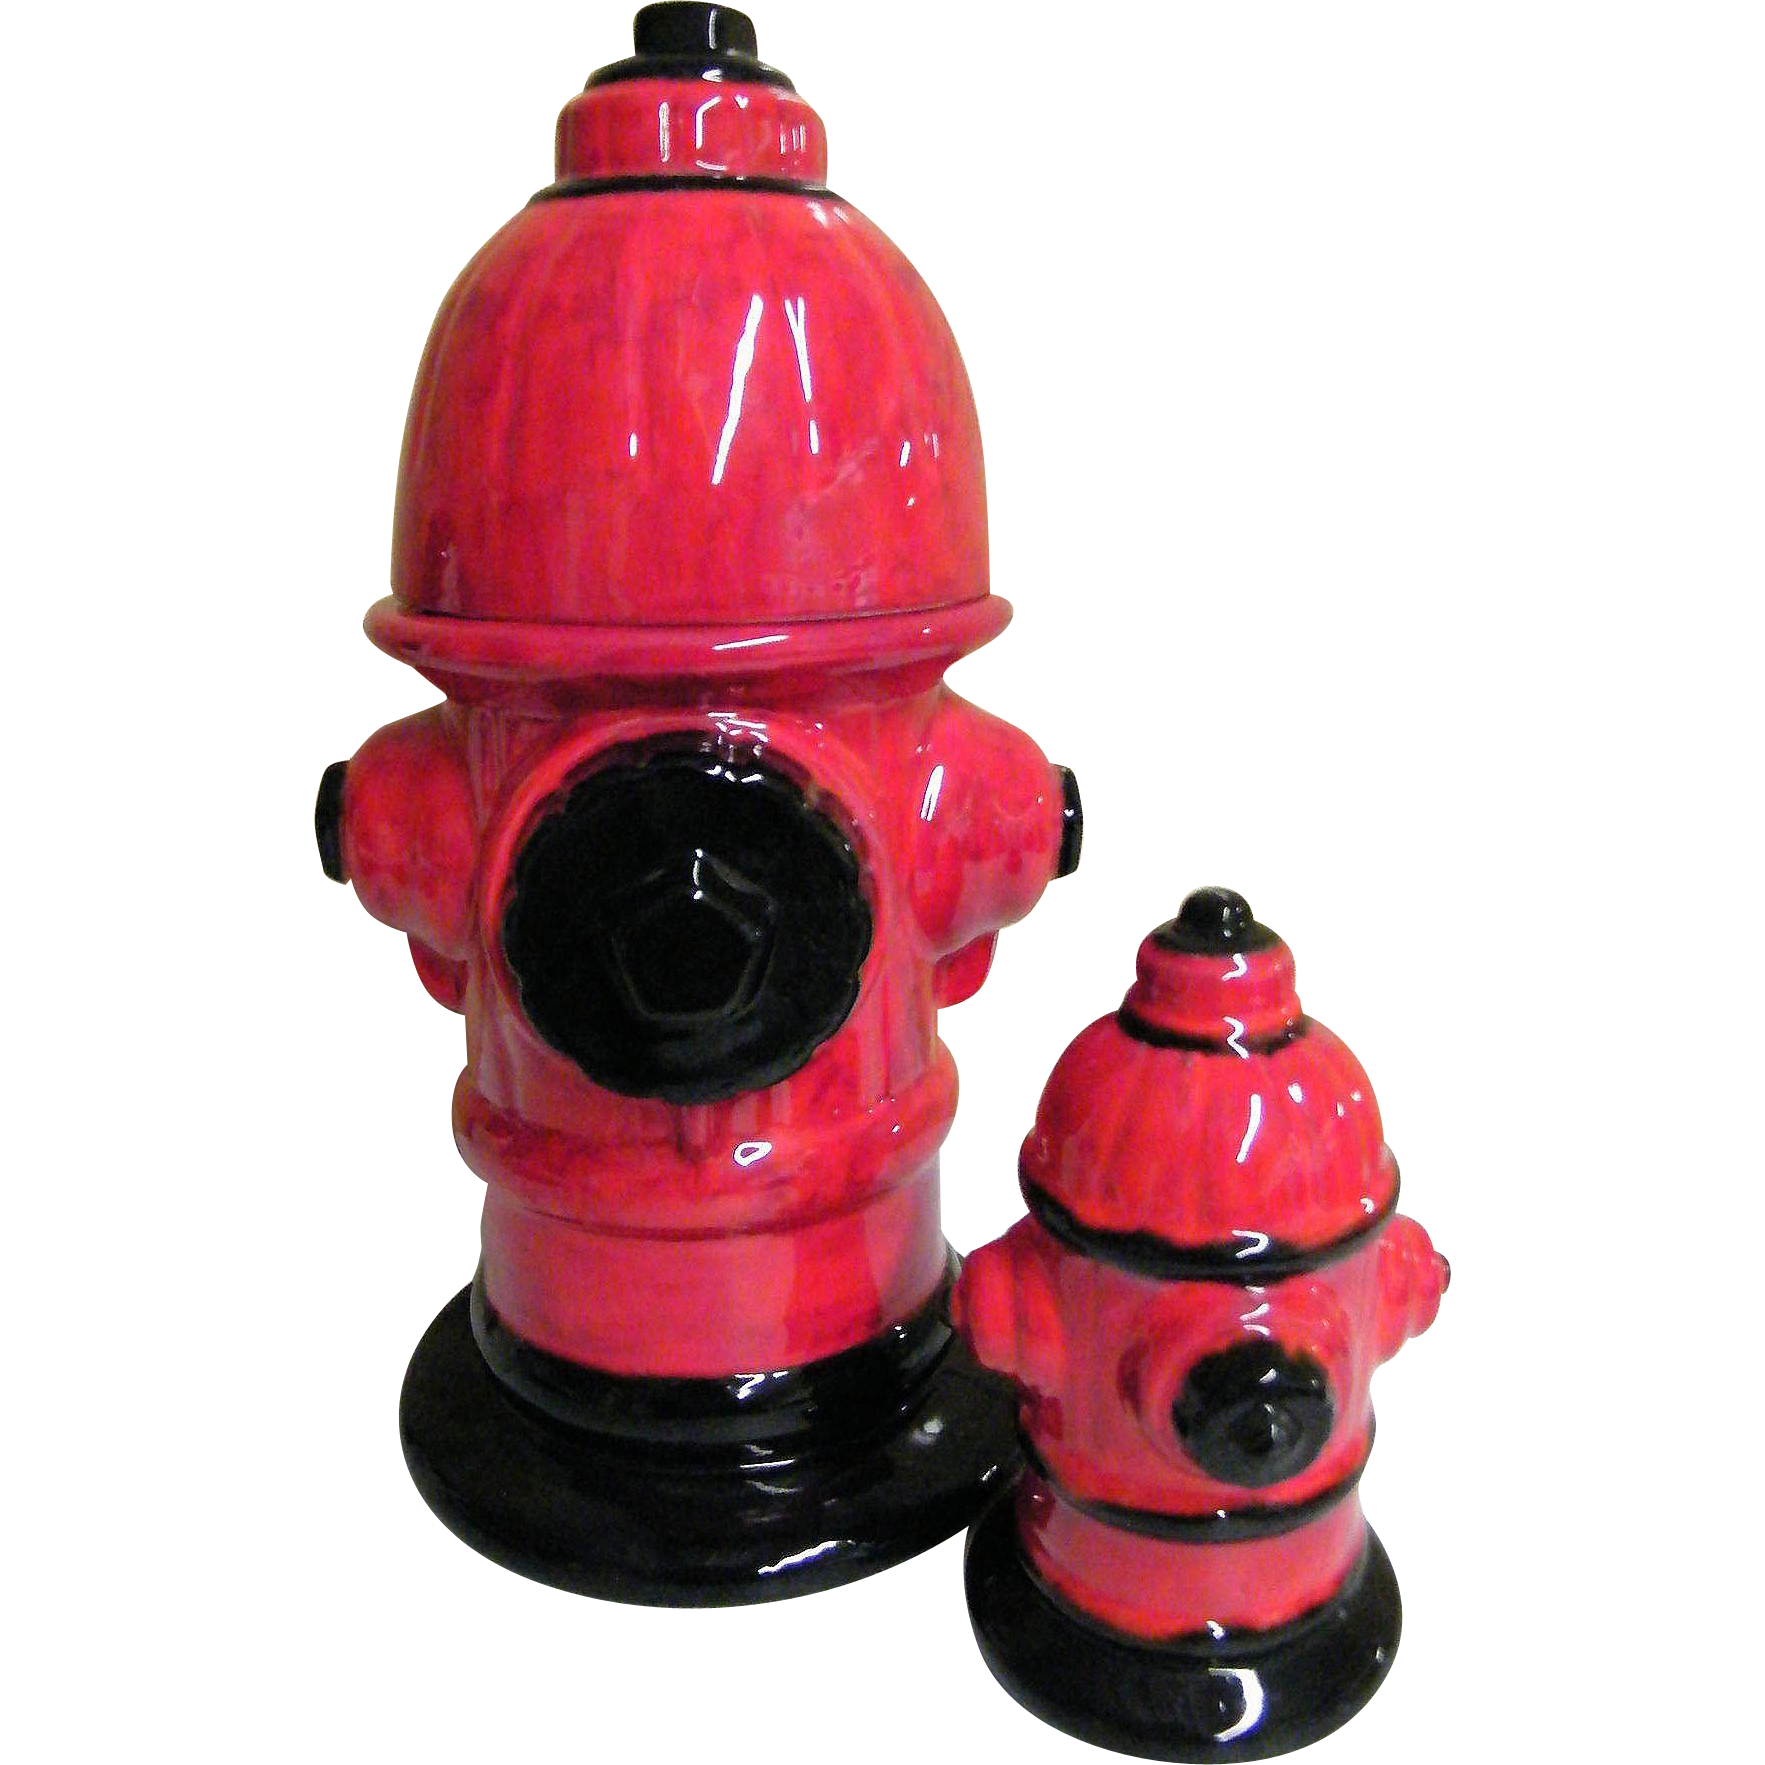 RED Fire Hydrant Cookie Jar & Matching Bank Ceramic : Lisa's Vintage ...